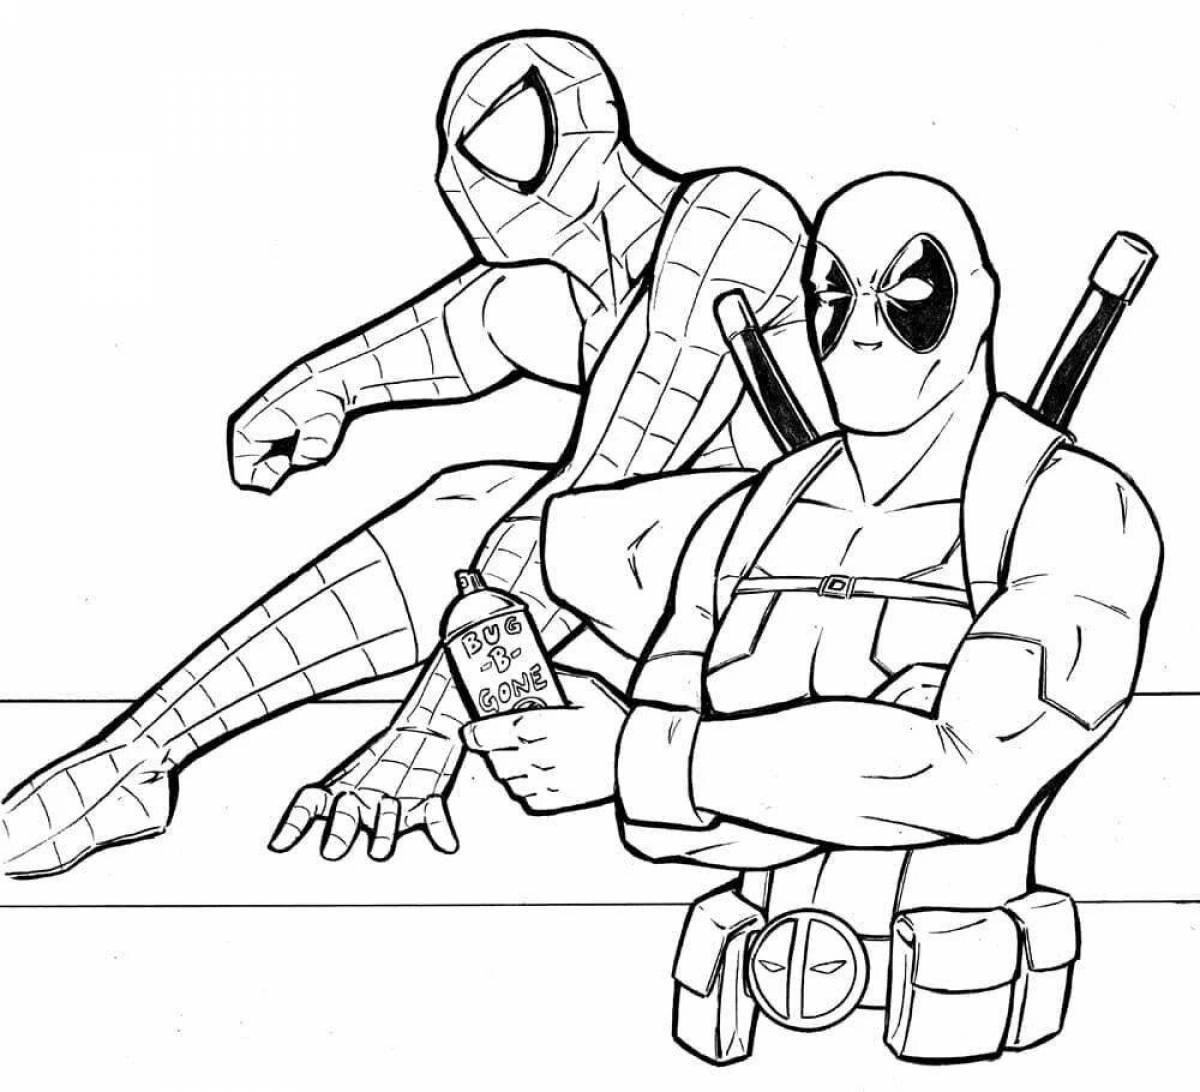 Colorful spiderman and iron man coloring pages for kids